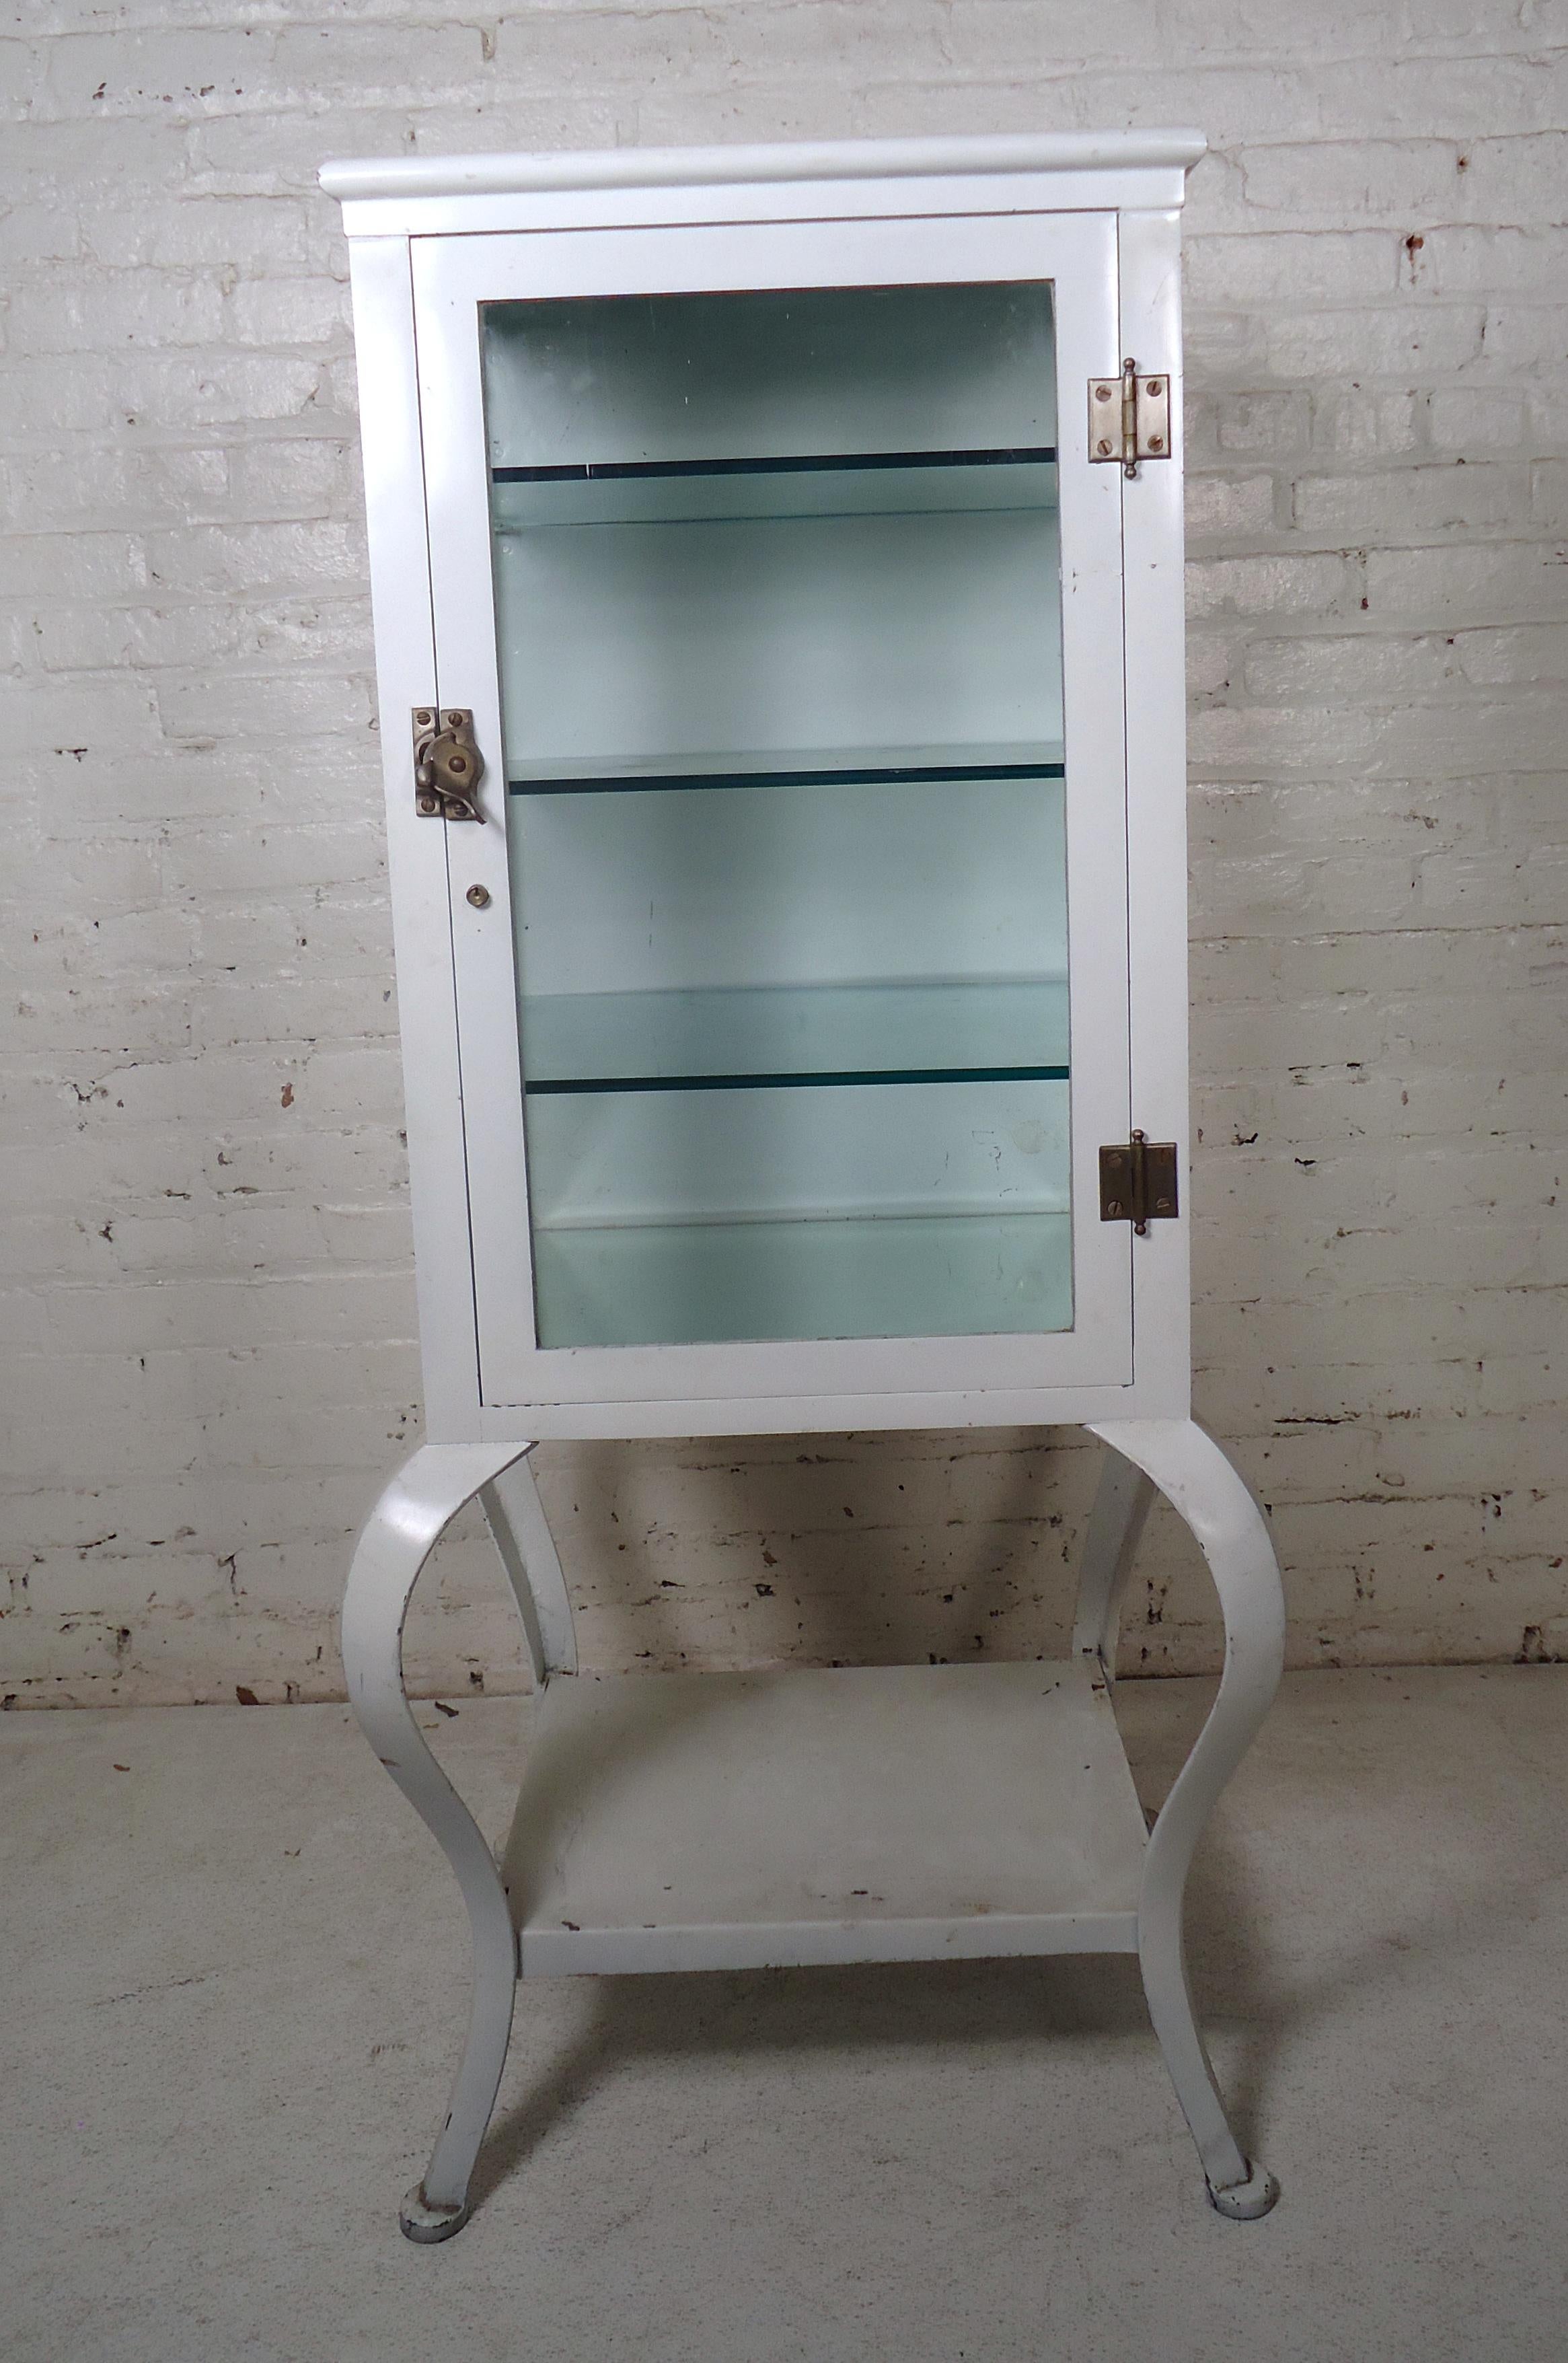 This vintage industrial medical cabinet features steel construction with wide glass display windows. Unique legs and shape make this stylish steel vitrine a wonderful storage piece in any interior. Please confirm item location (NY or NJ), two glass